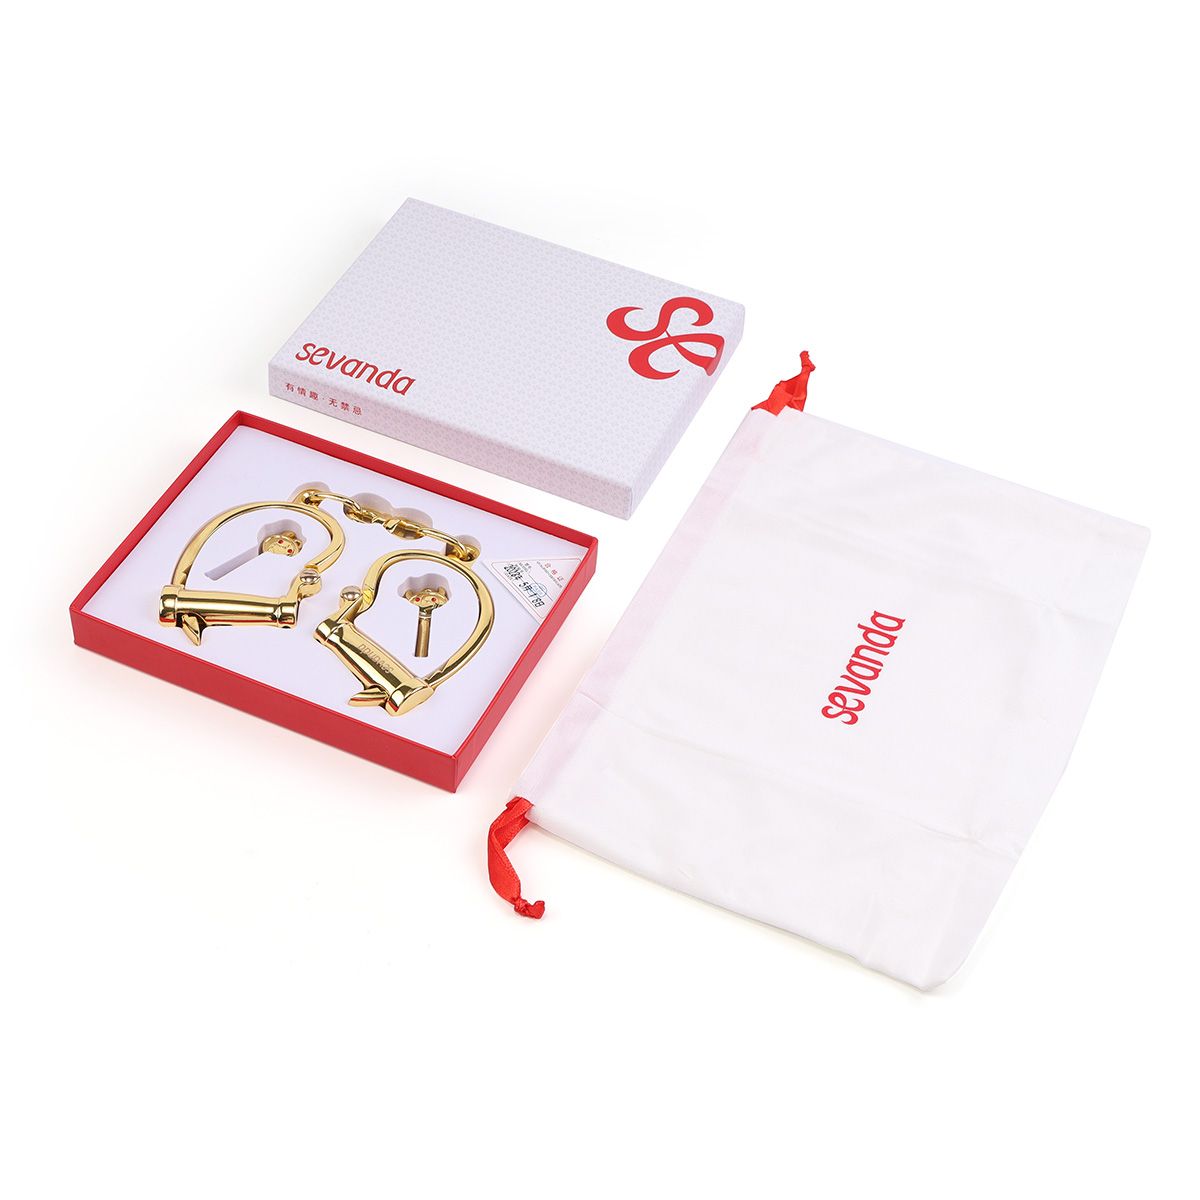 Deluxe gold plated handcuffs 